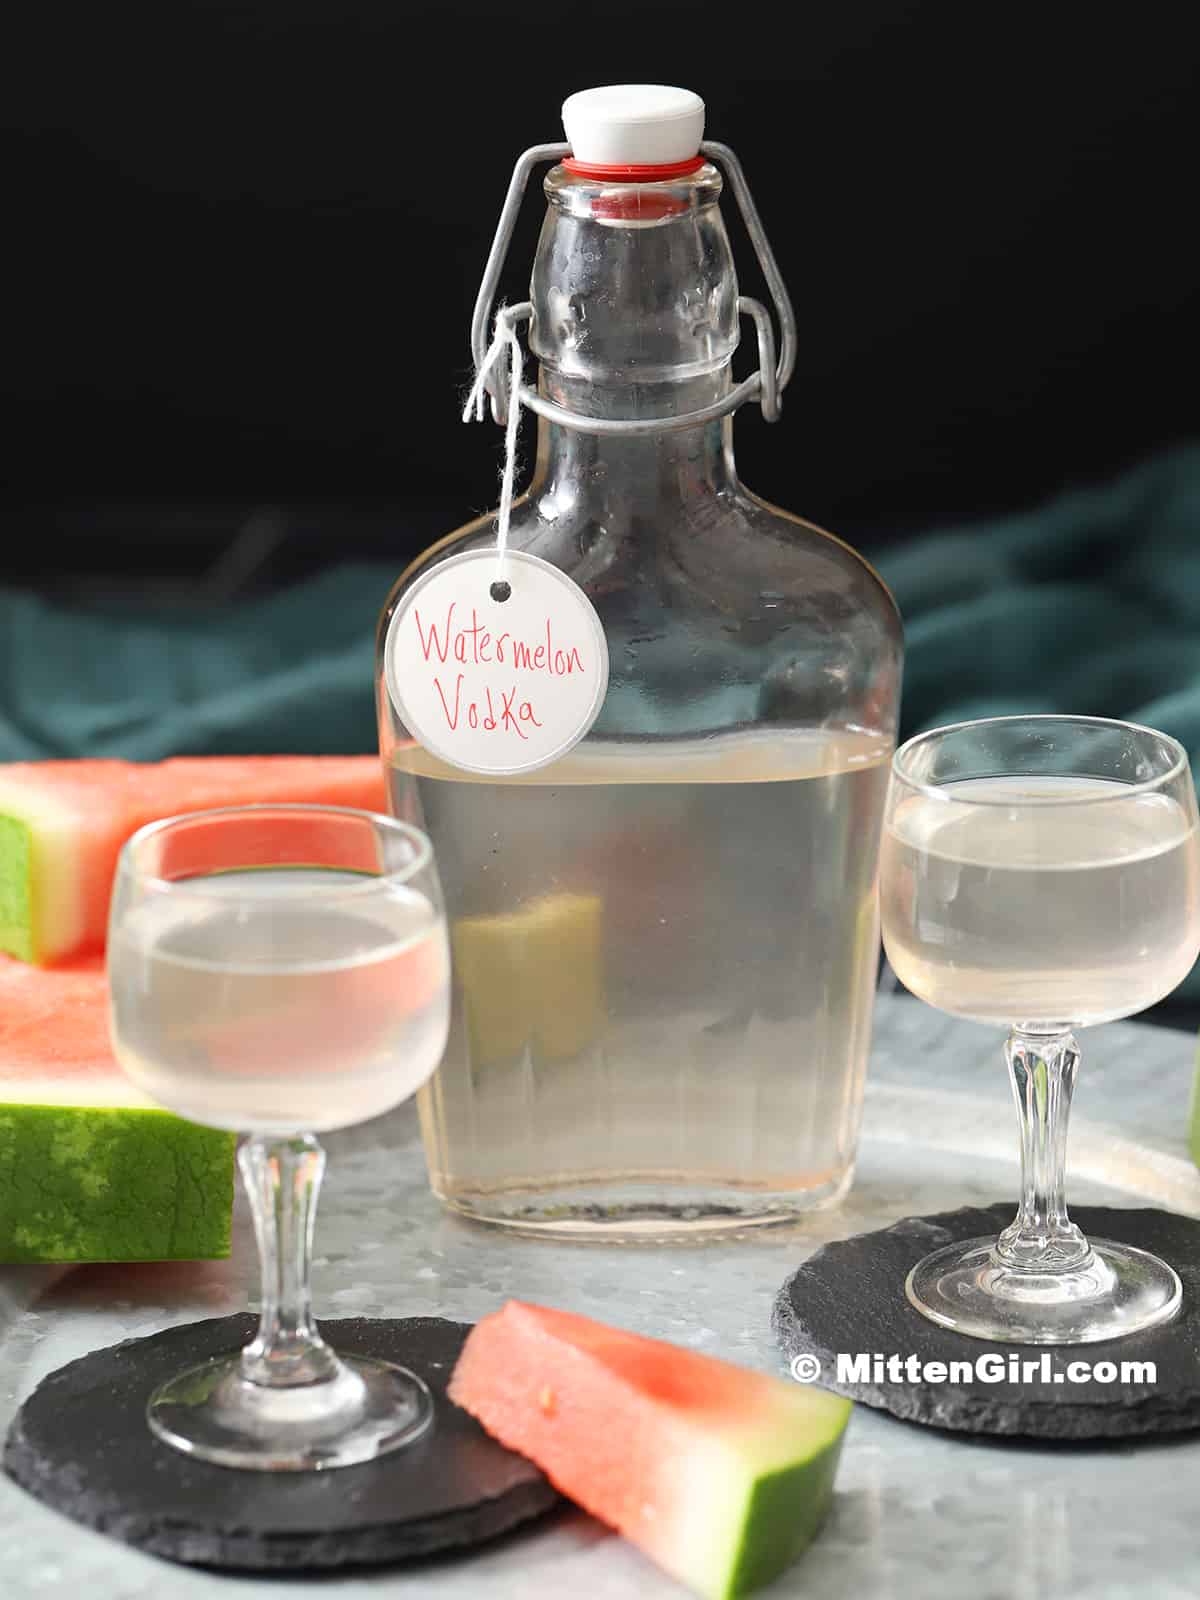 A bottle of watermelon vodka with two small glasses.